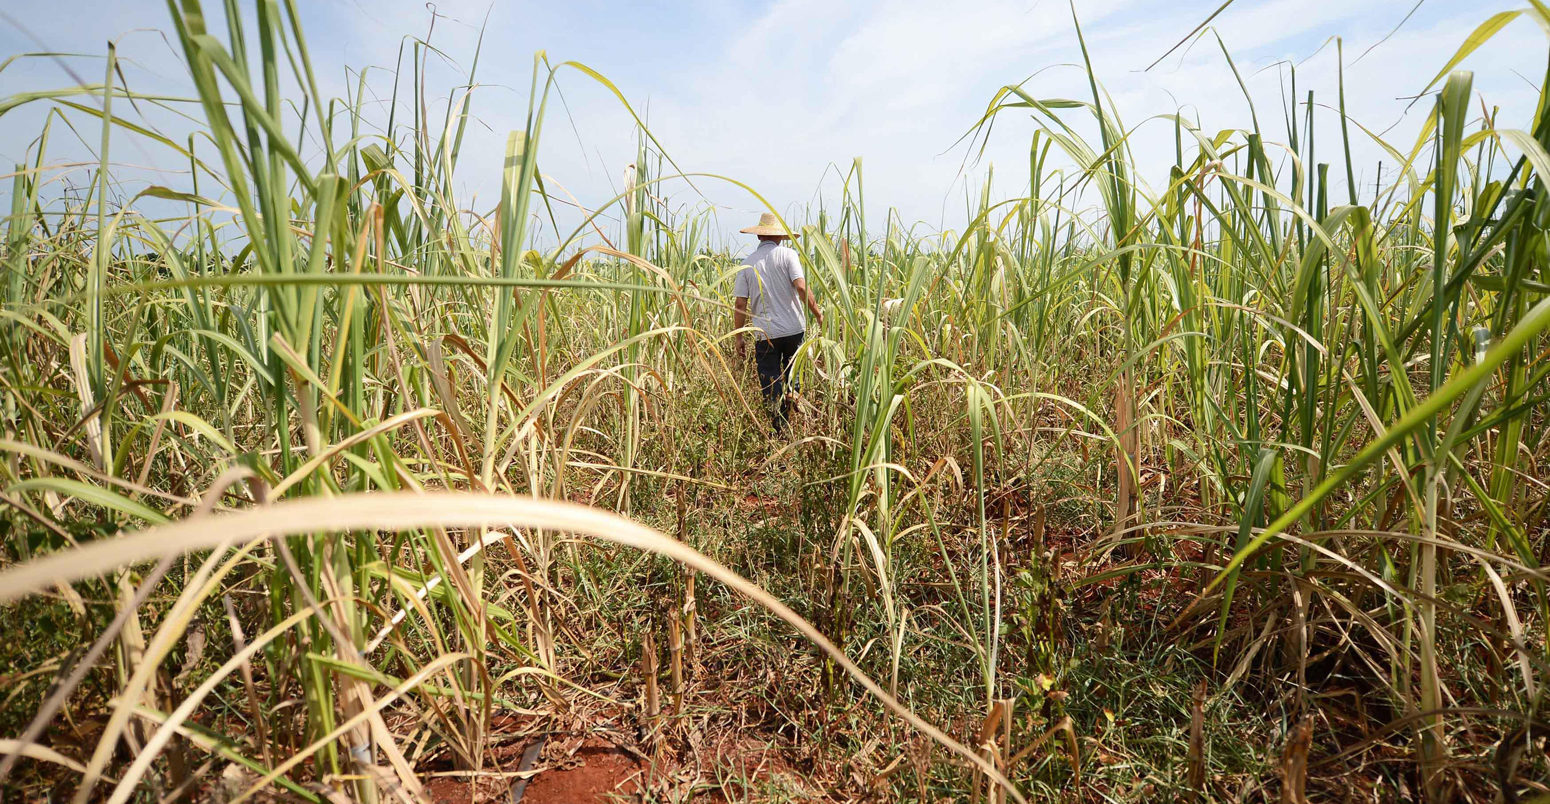 A villager is seen in a sugarcane field in Shiguoxia Village in Xuwen County, south China's Guangdong Province